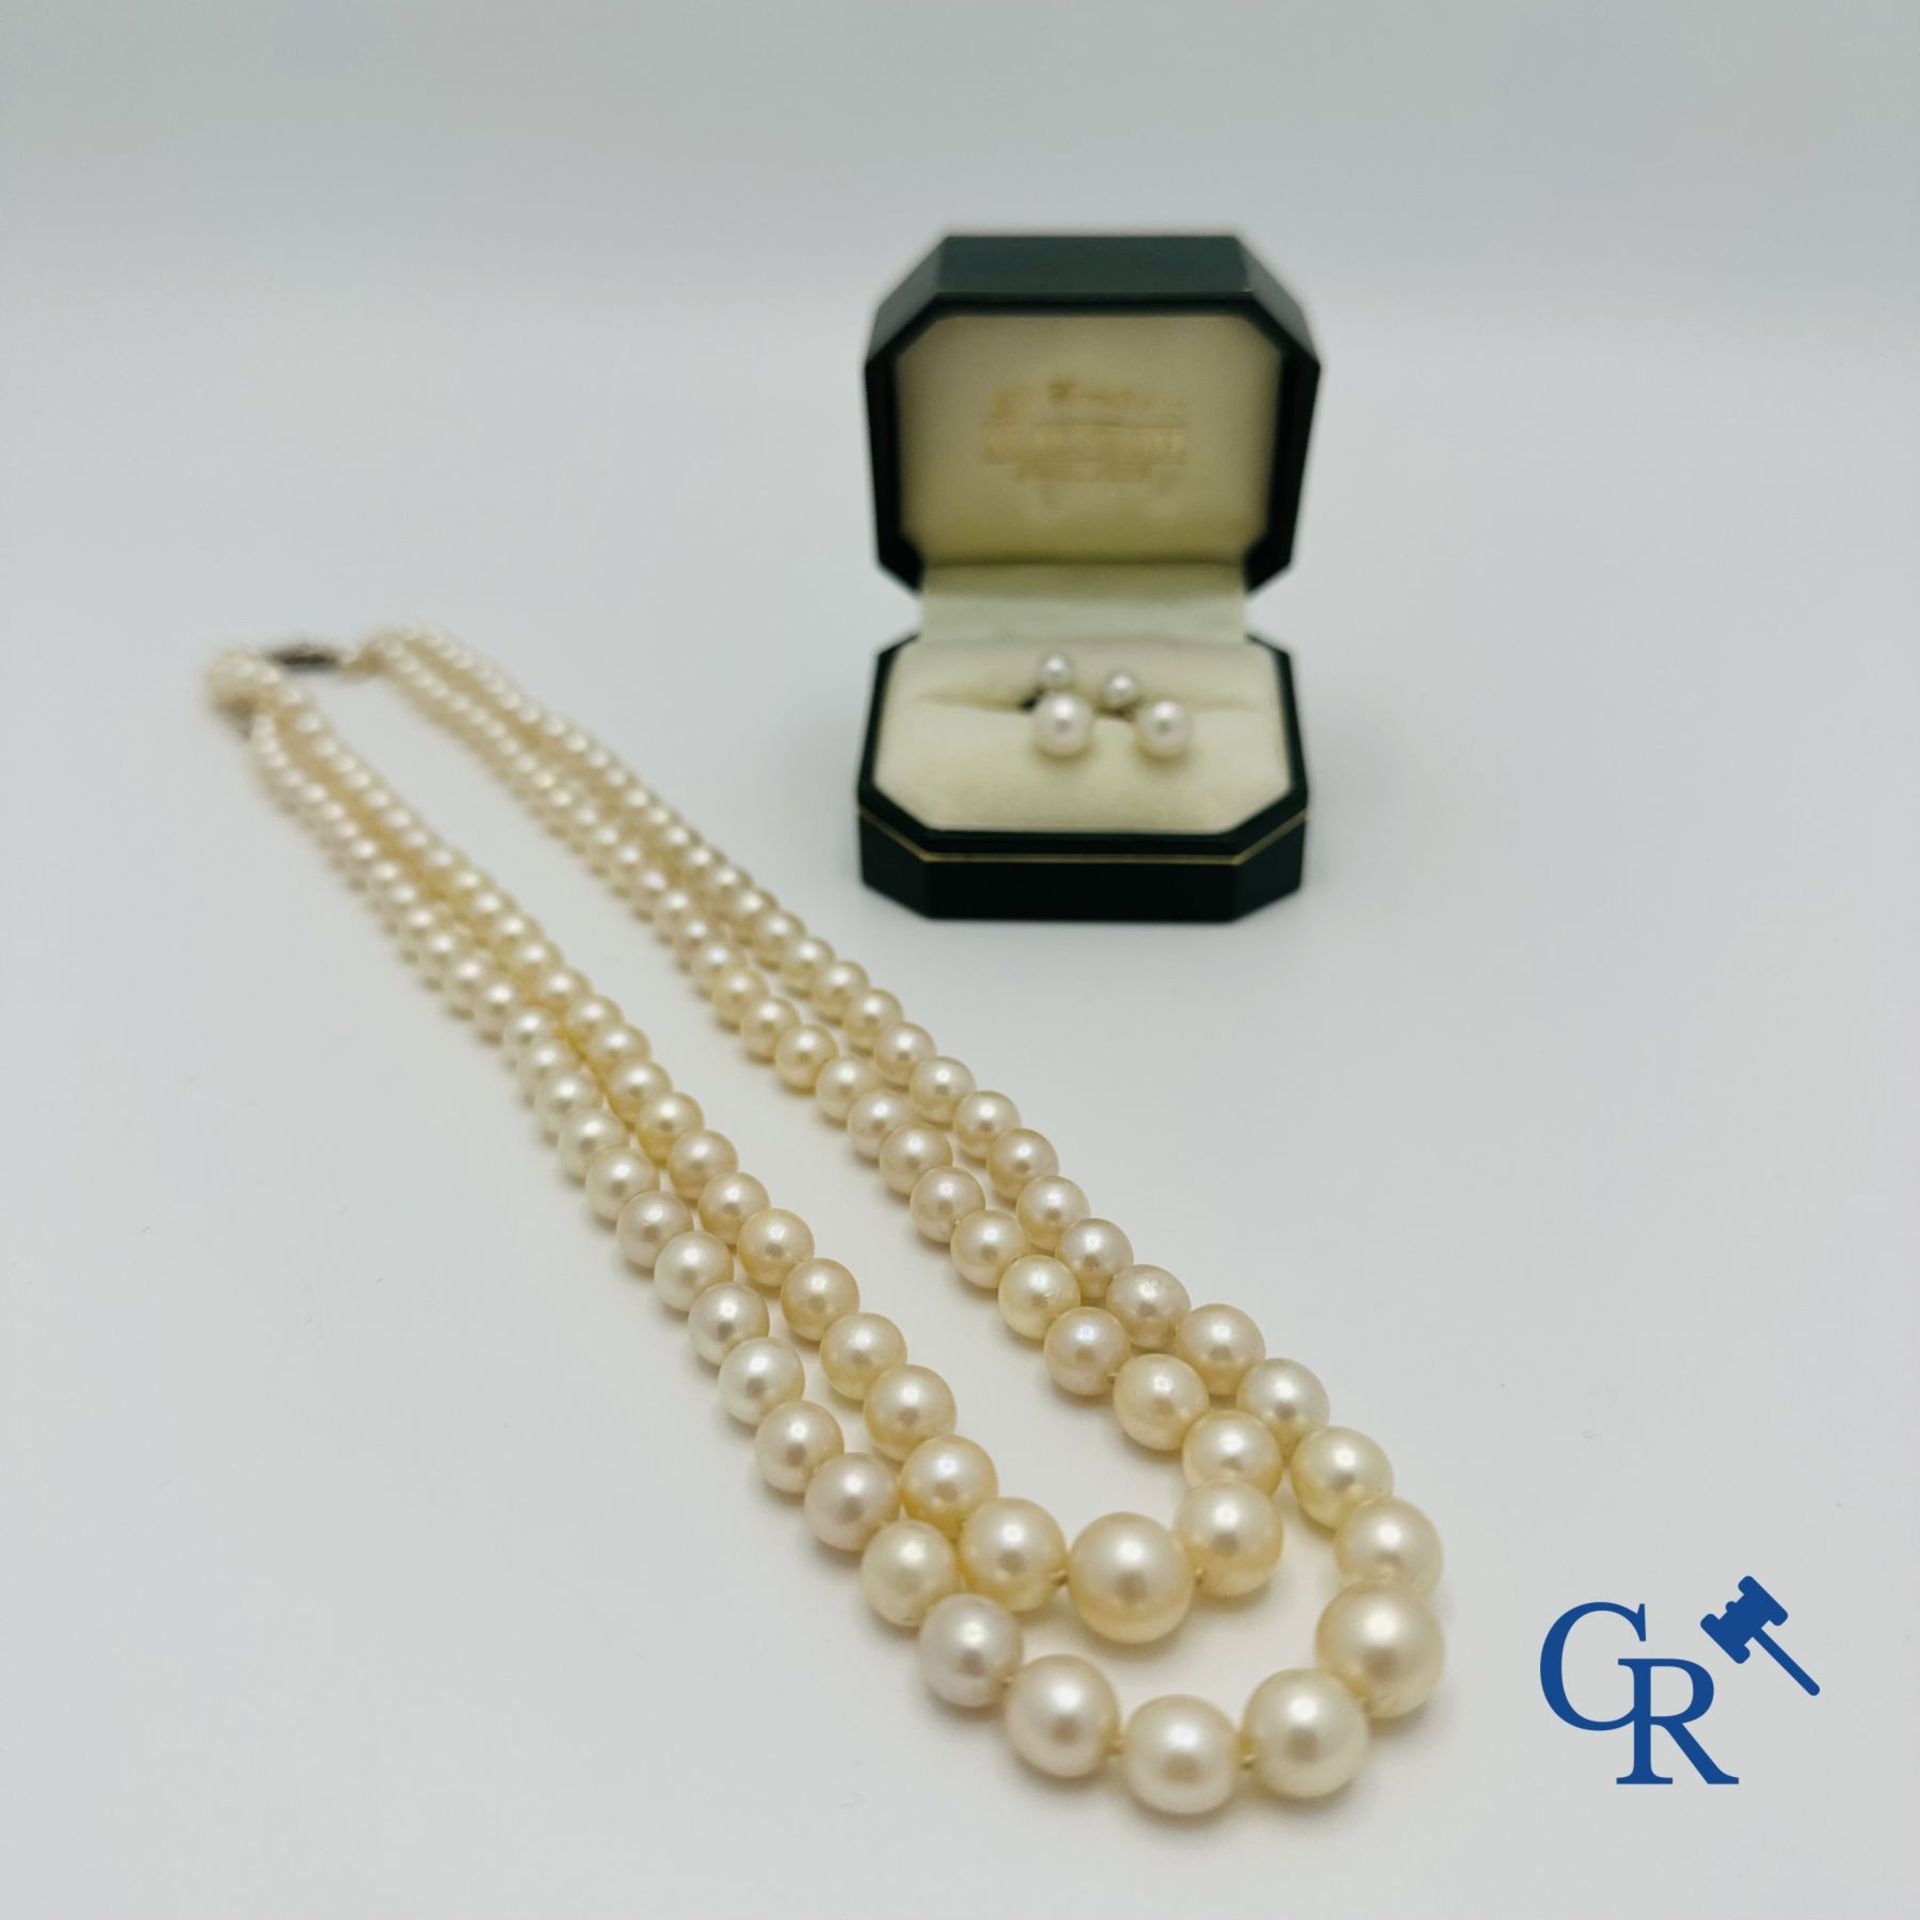 Jewellery: Lot consisting of a pearl necklace with gold clasp 18K and a pair of earrings in white go - Bild 2 aus 5